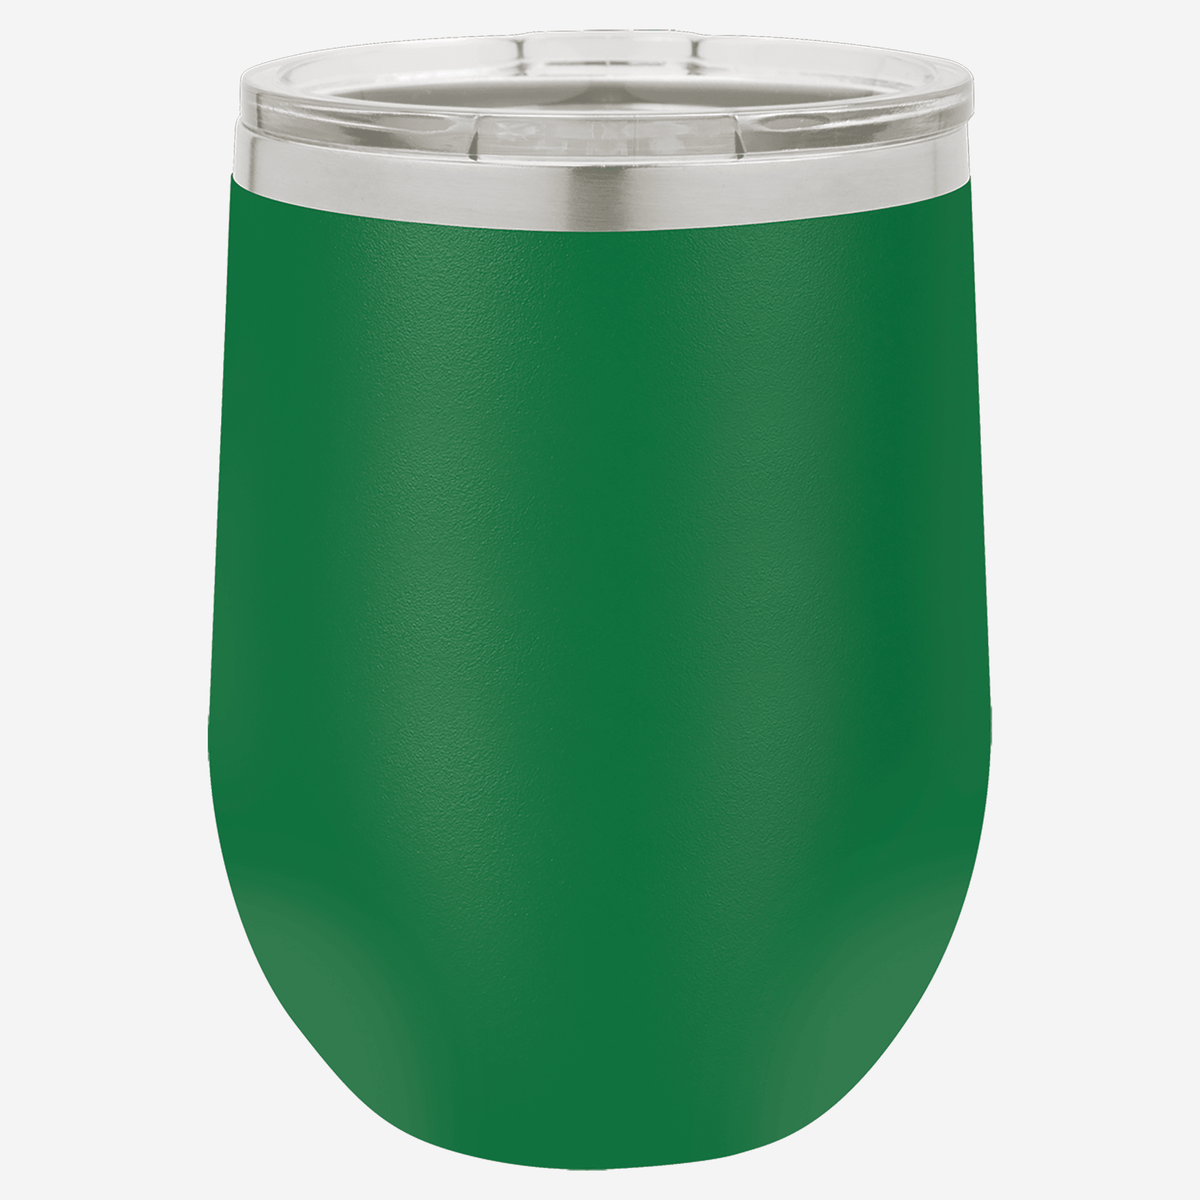 12 oz. kelly green stainless steel tumbler with clear lid